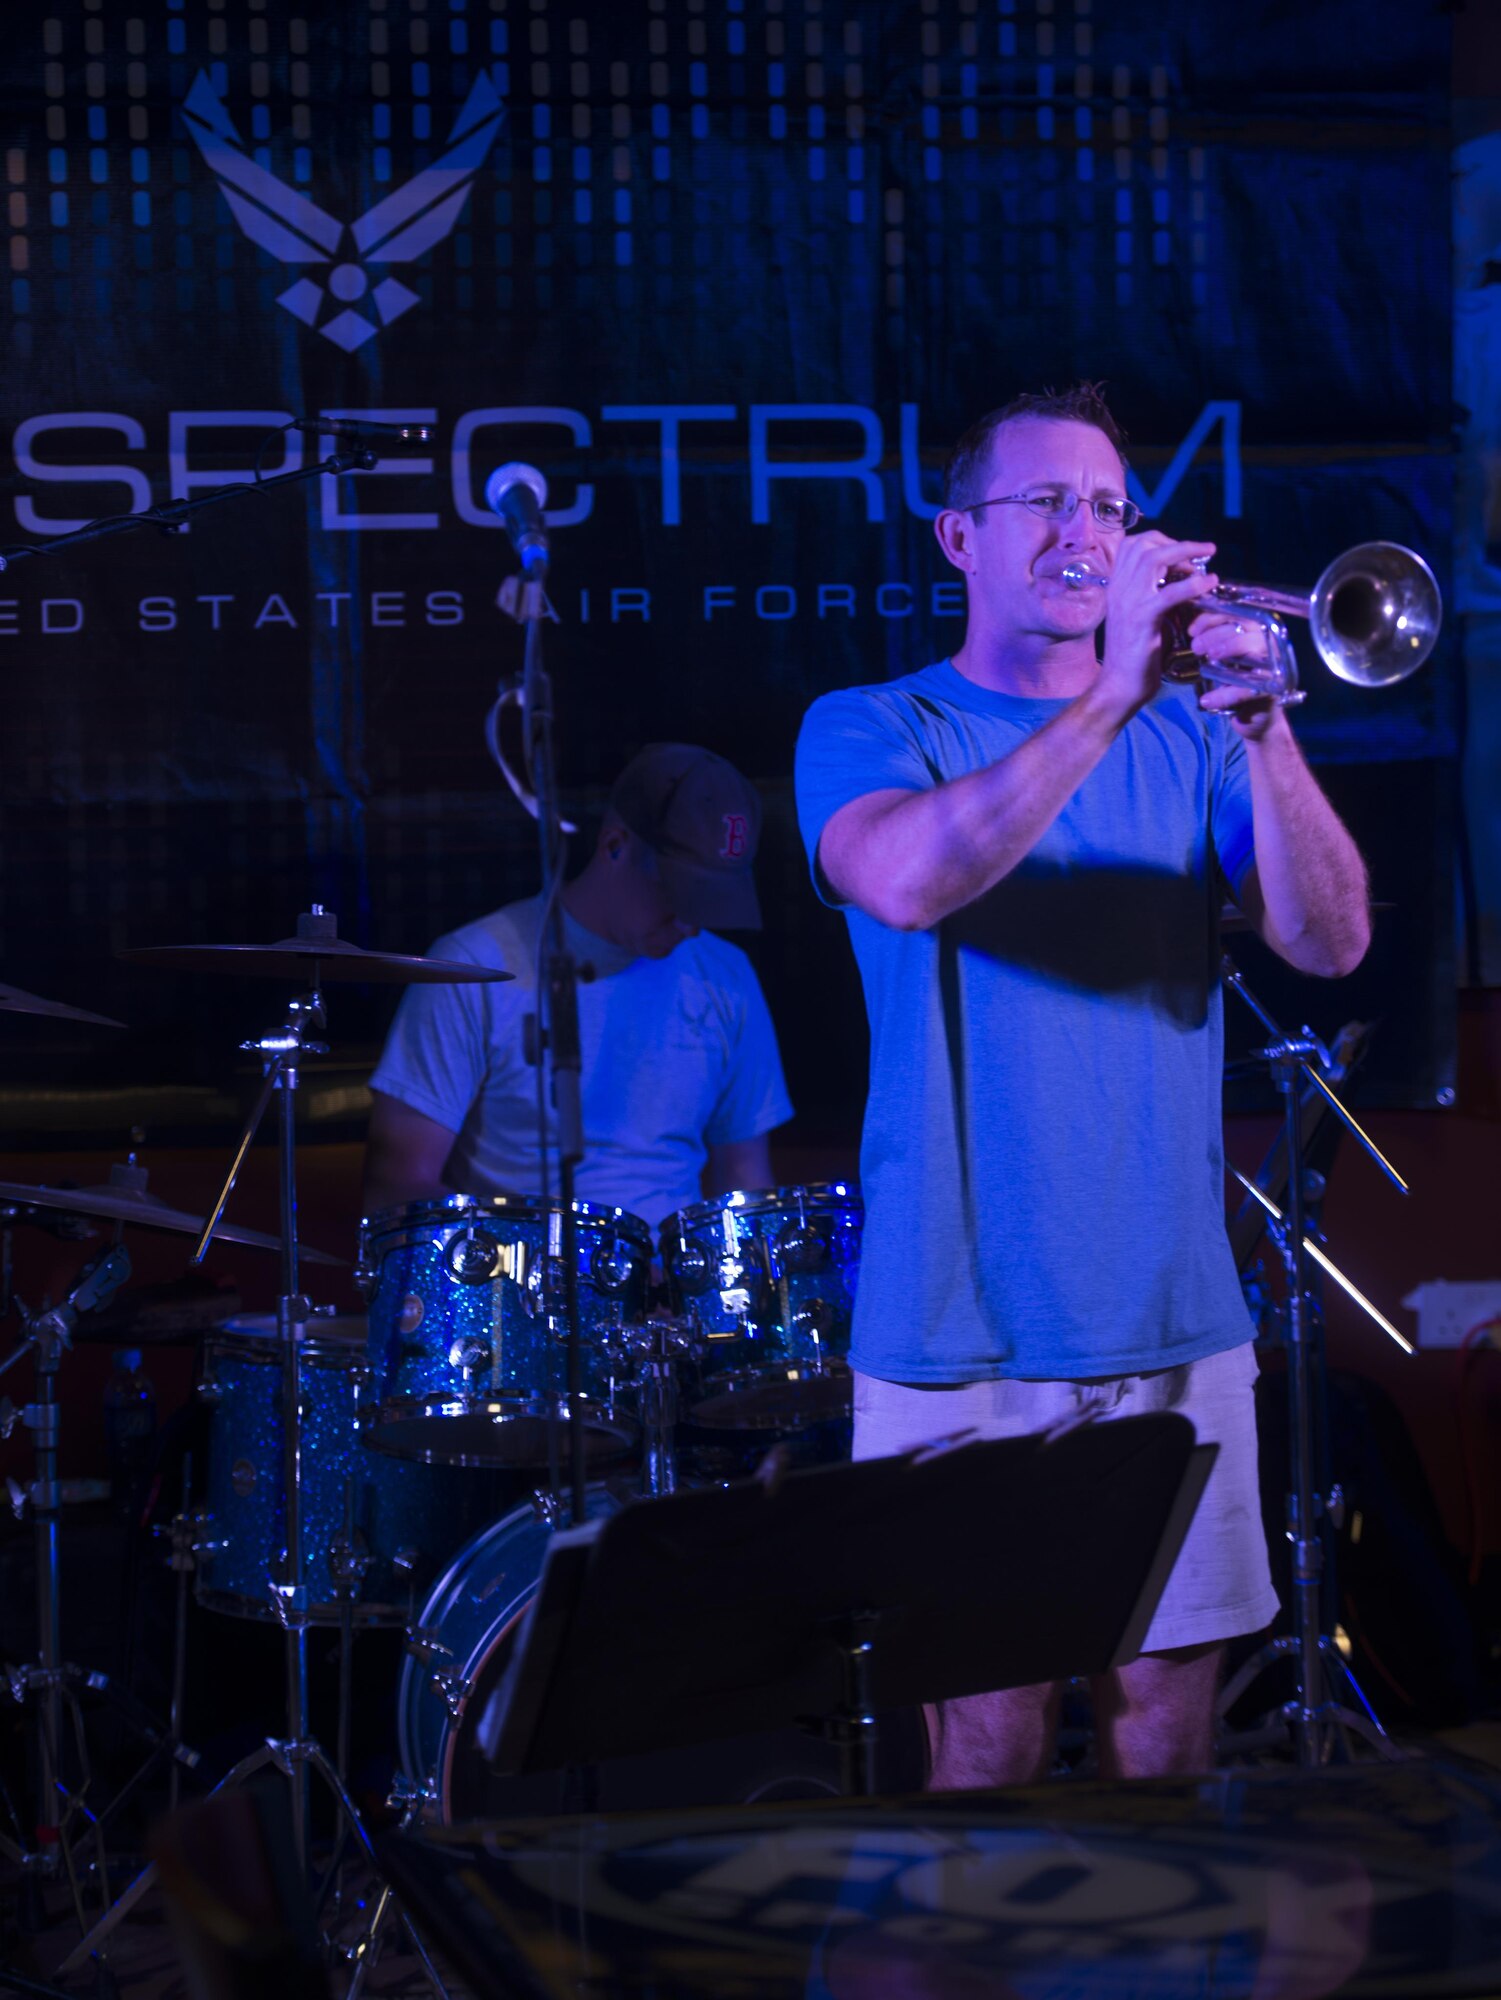 Senior Airman Mark Oates, a trumpet player with the U.S. Air Force’s Central Command Band, Full Spectrum, performs at the Fox Sports Lounge at Al Udeid Air Base, Qatar Oct. 13, 2015. The performance was the band’s last before the group kicks-off a 16-day tour. Oates has been playing the trumpet for 28 years and said he enjoys performing live. (U.S. Air Force Photo/Tech. Sgt. James Hodgman)